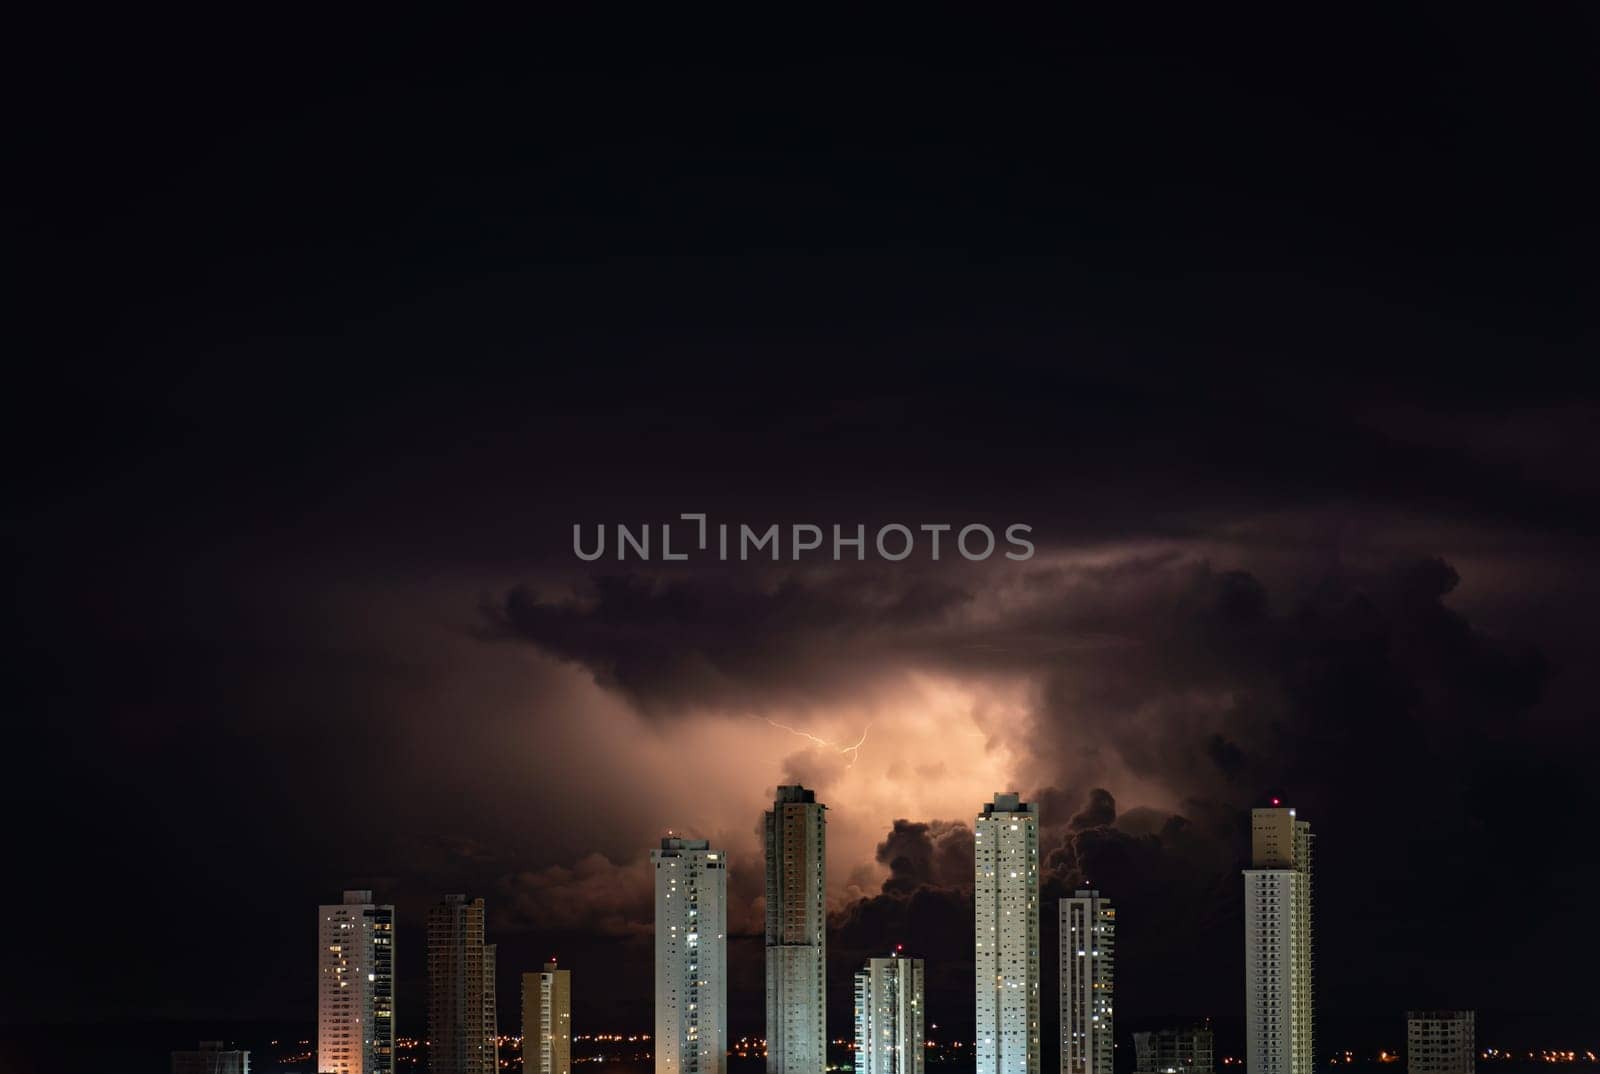 Impressive row of towering skyscrapers with a thunderstorm and lightning bolts above them, perfect for adding text. The buildings dominate the city skyline with their height.